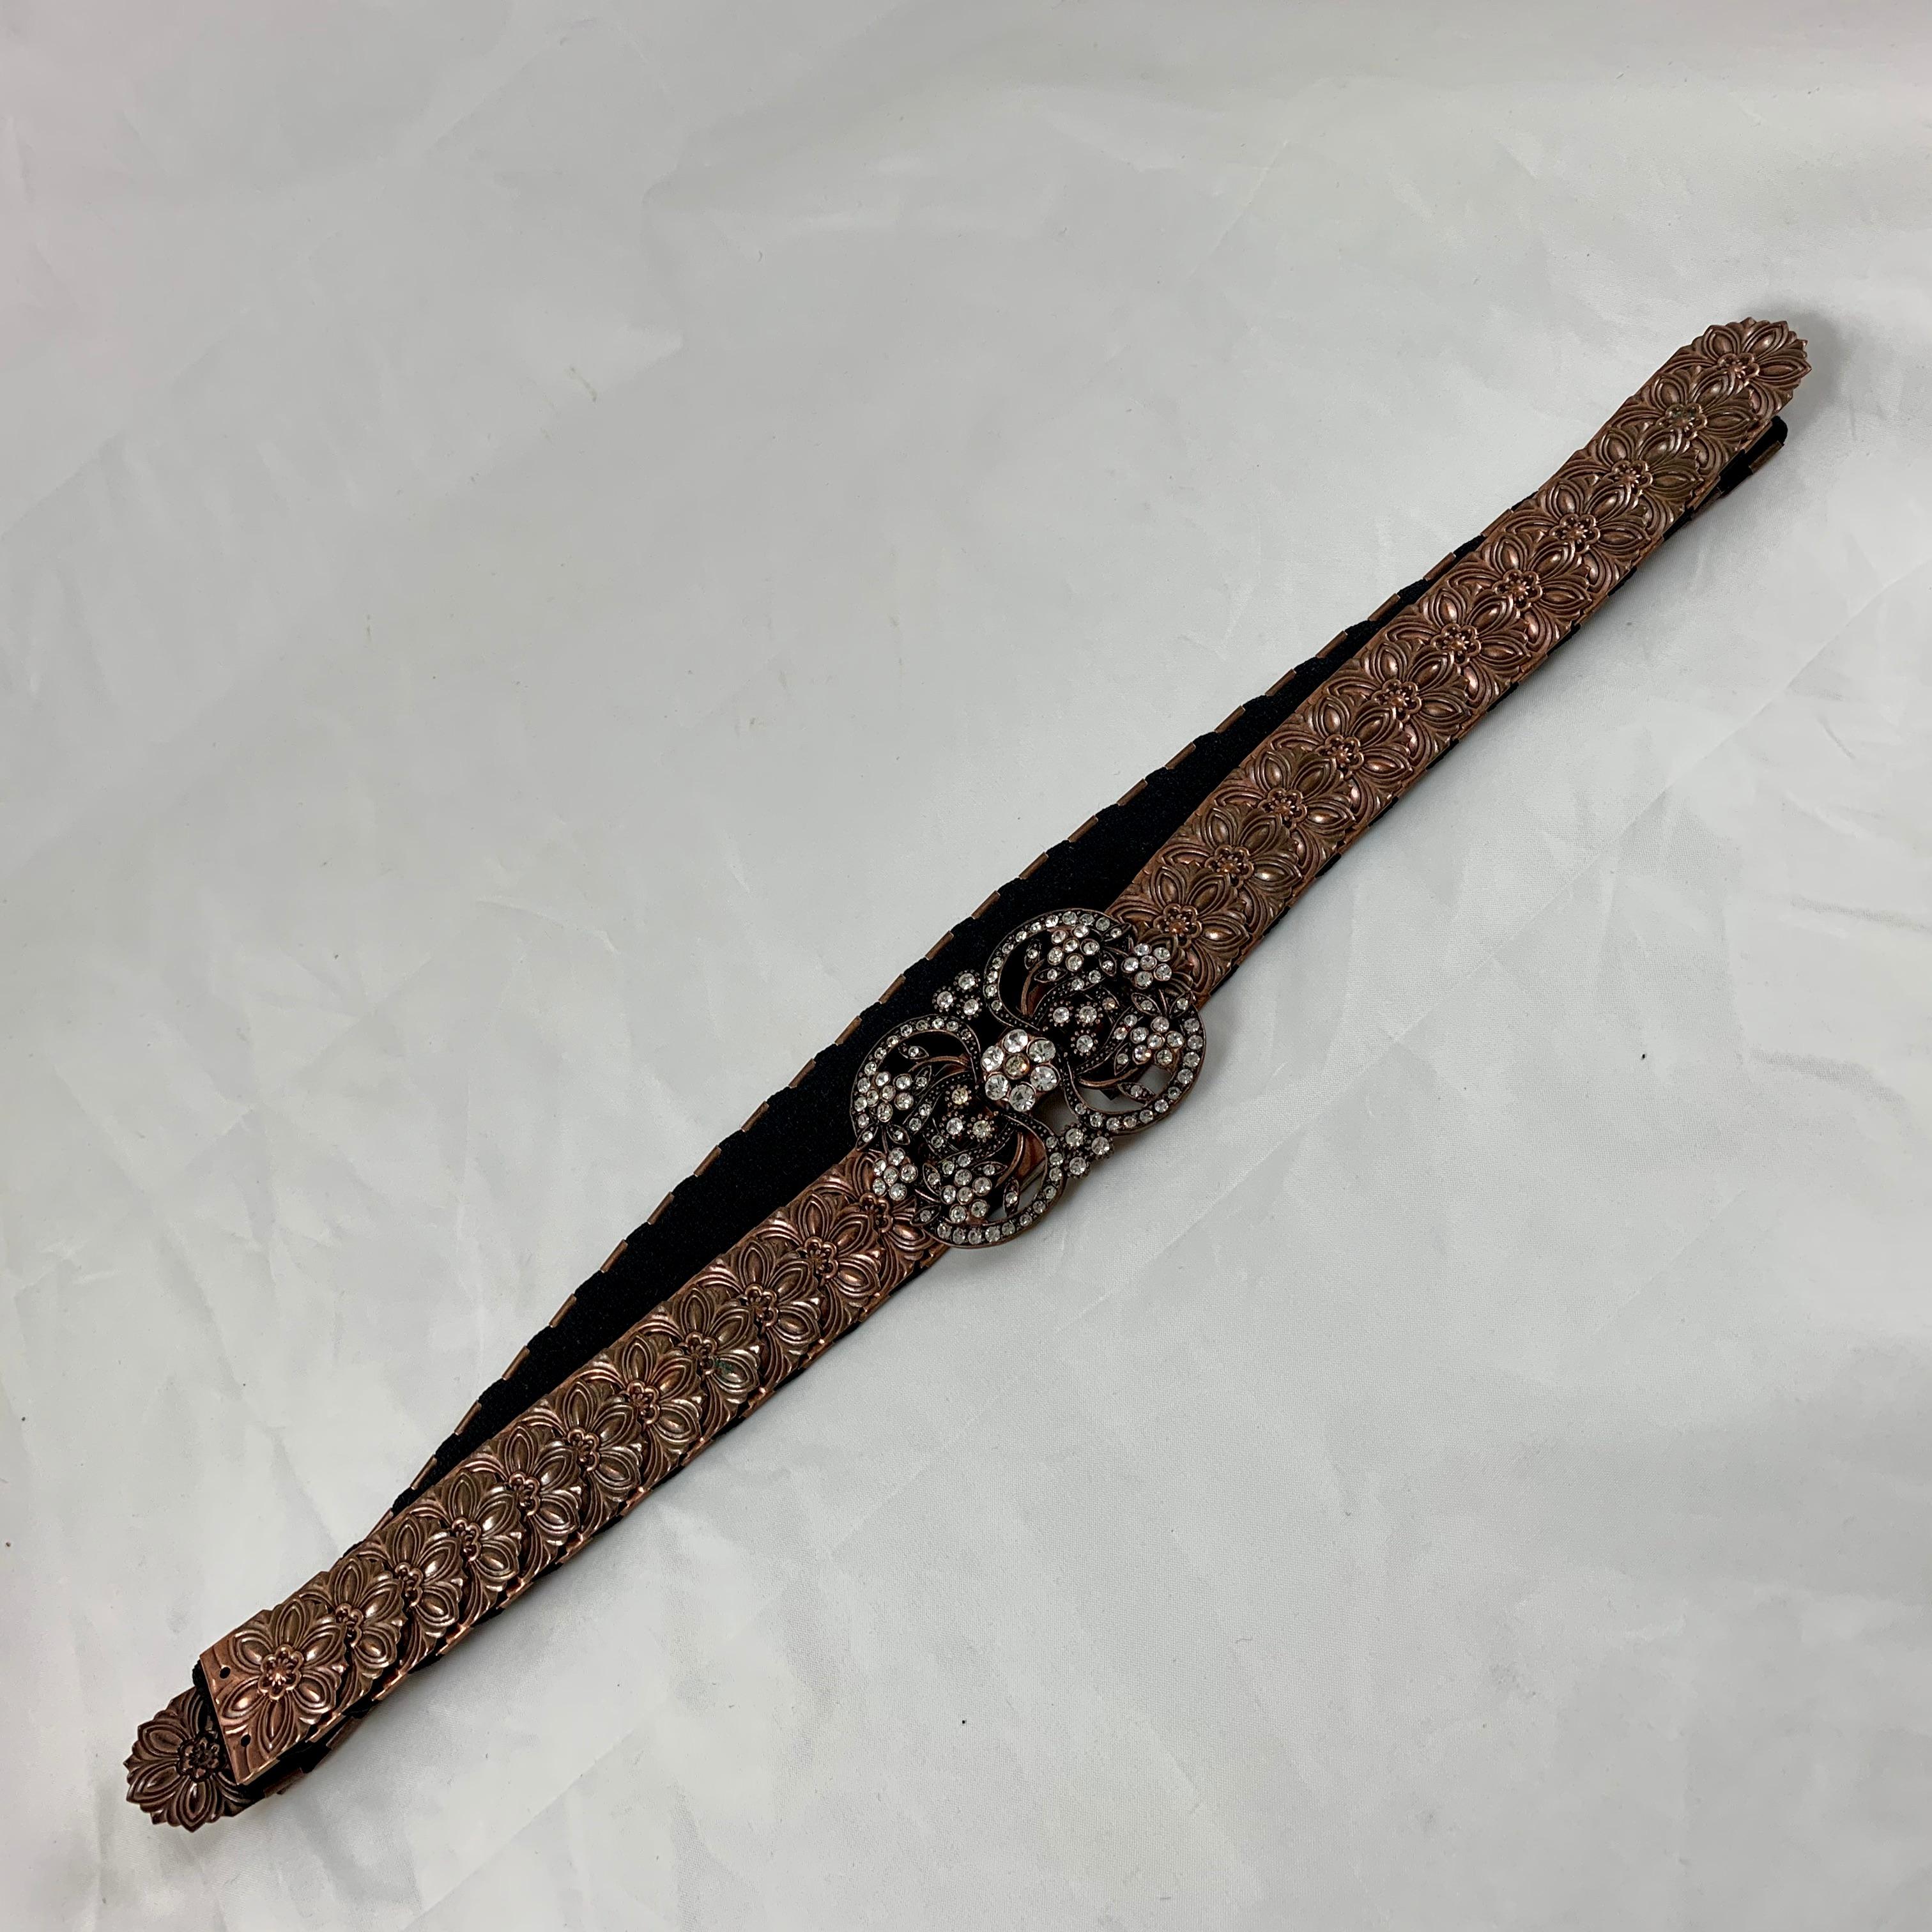 1970s Era Copper-Tone Snake Scale Metal and Crystal Jeweled Buckle Handmade Belt For Sale 5